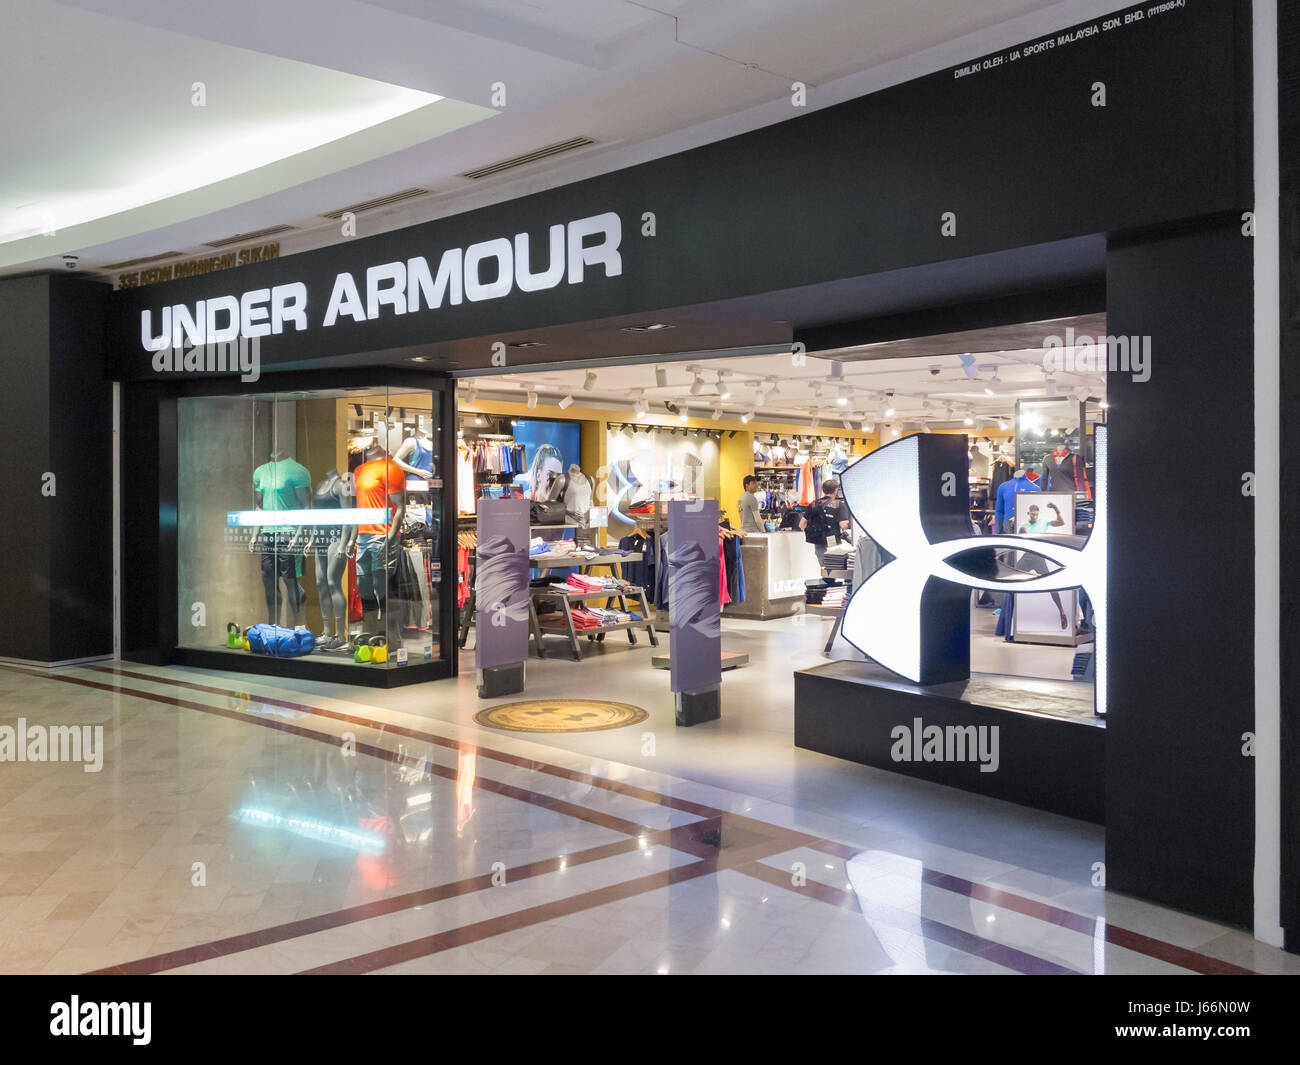 Under Armour High Resolution Stock Photography and Images - Alamy